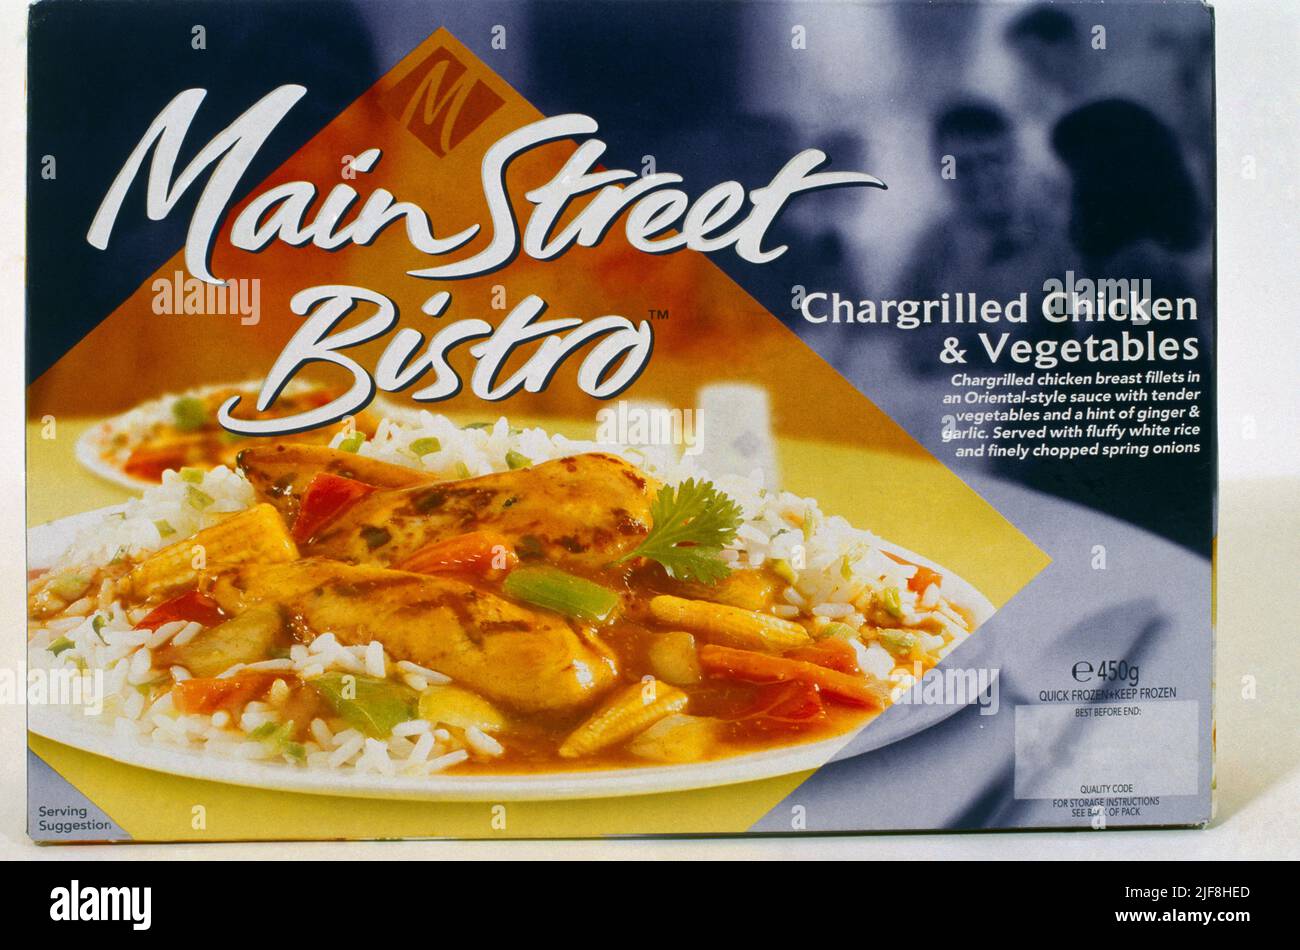 Main Street Bistro Chargrilled Chicken and Vegetables Convenience Meal Stock Photo